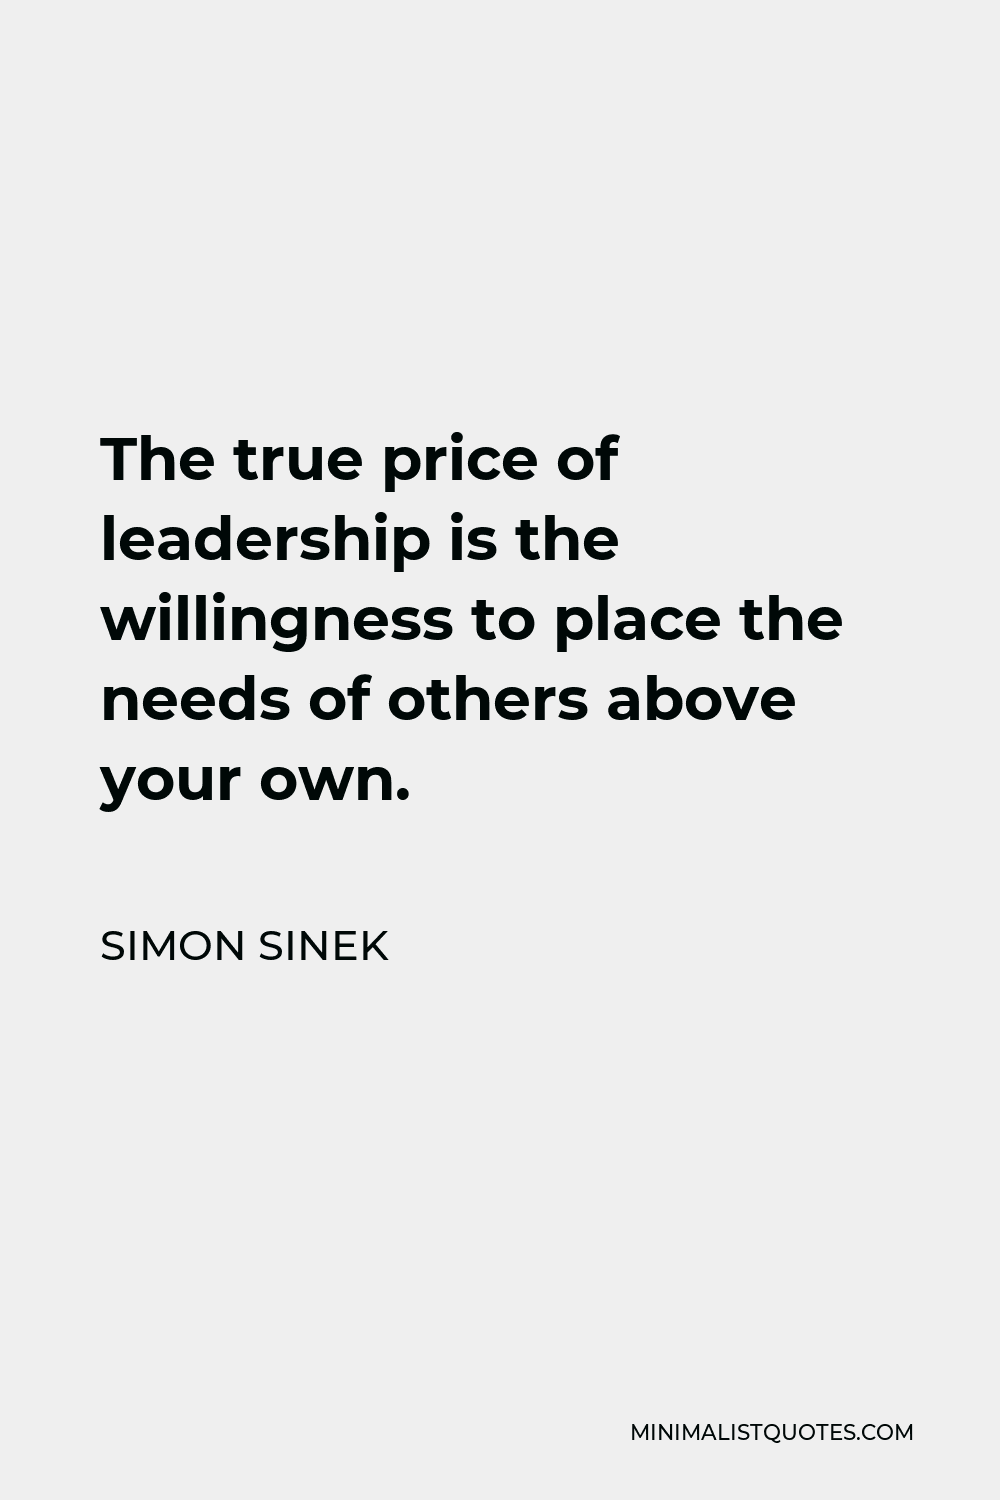 Simon Sinek Quote - The true price of leadership is the willingness to place the needs of others above your own.